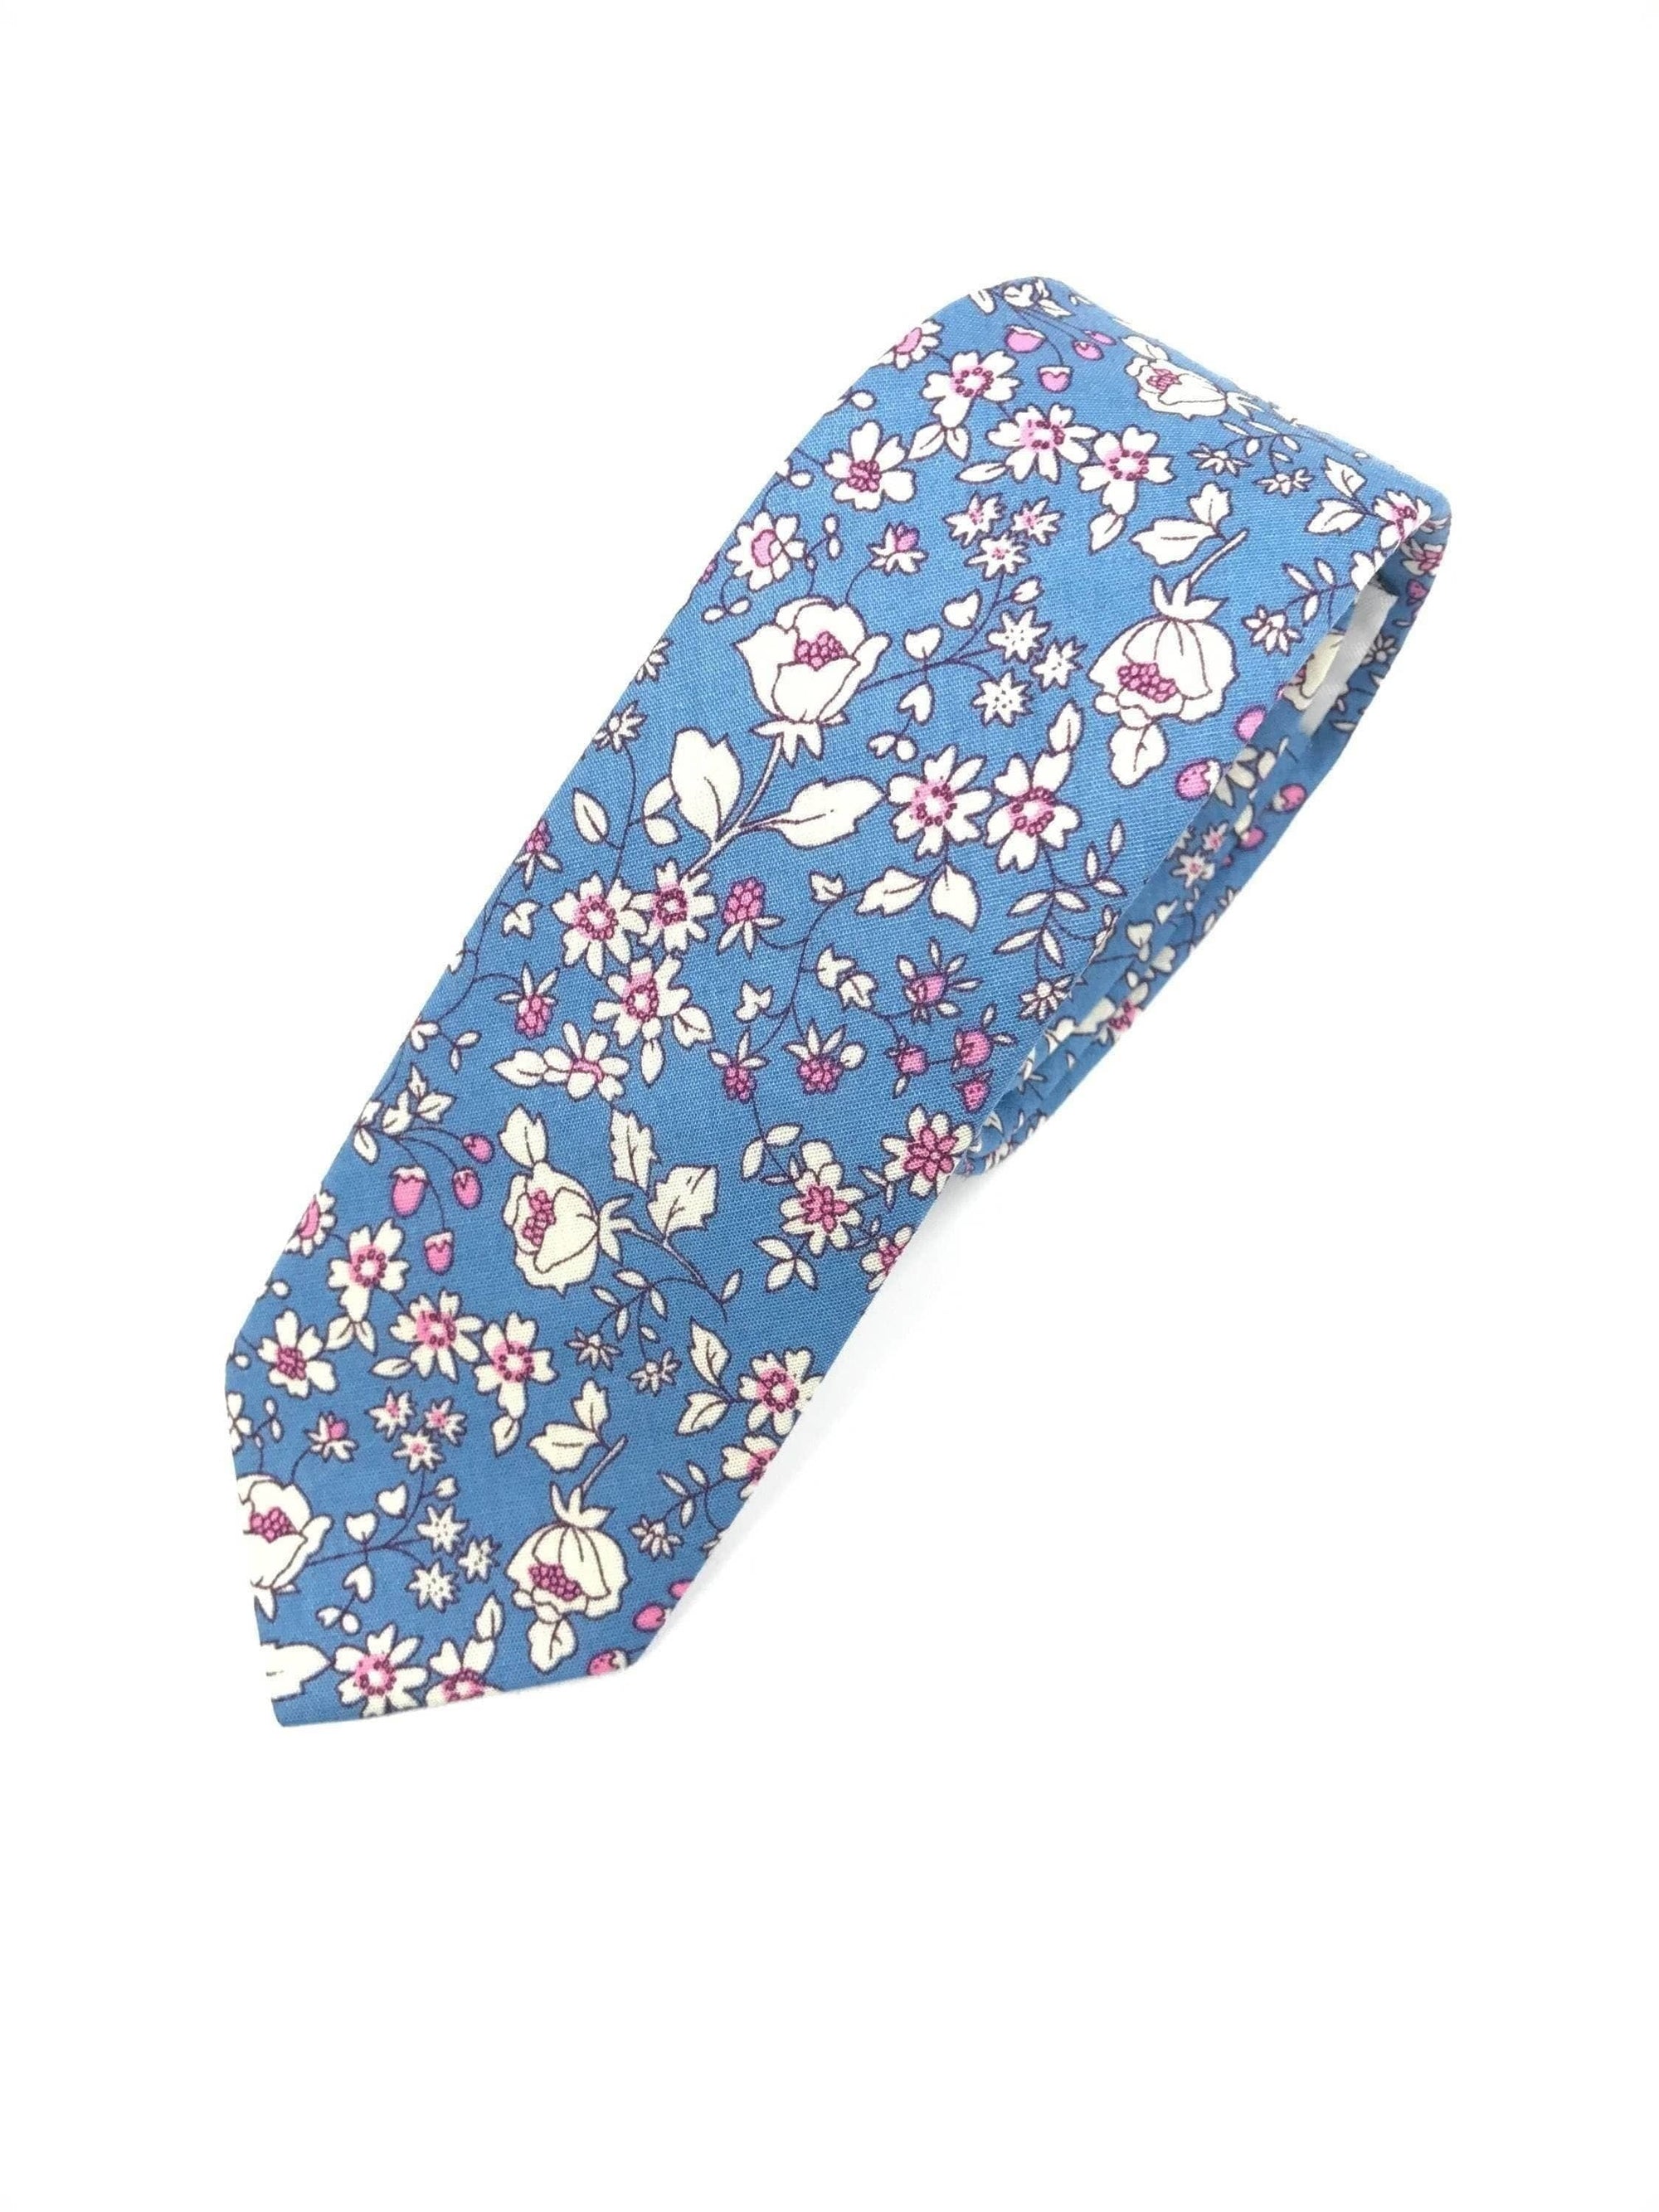 Light Blue Floral Tie Retro 2.36" Mytieshop - DAISY-Neckties-Light Blue Floral Tie Retro 2.36" Mytieshop DAISY for weddings and events, great for prom and anniversary gifts. Mens floral ties near me us ties-Mytieshop. Skinny ties for weddings anniversaries. Father of bride. Groomsmen. Cool skinny neckties for men. Neckwear for prom, missions and fancy events. Gift ideas for men. Anniversaries ideas. Wedding aesthetics. Flower ties. Dry flower ties.